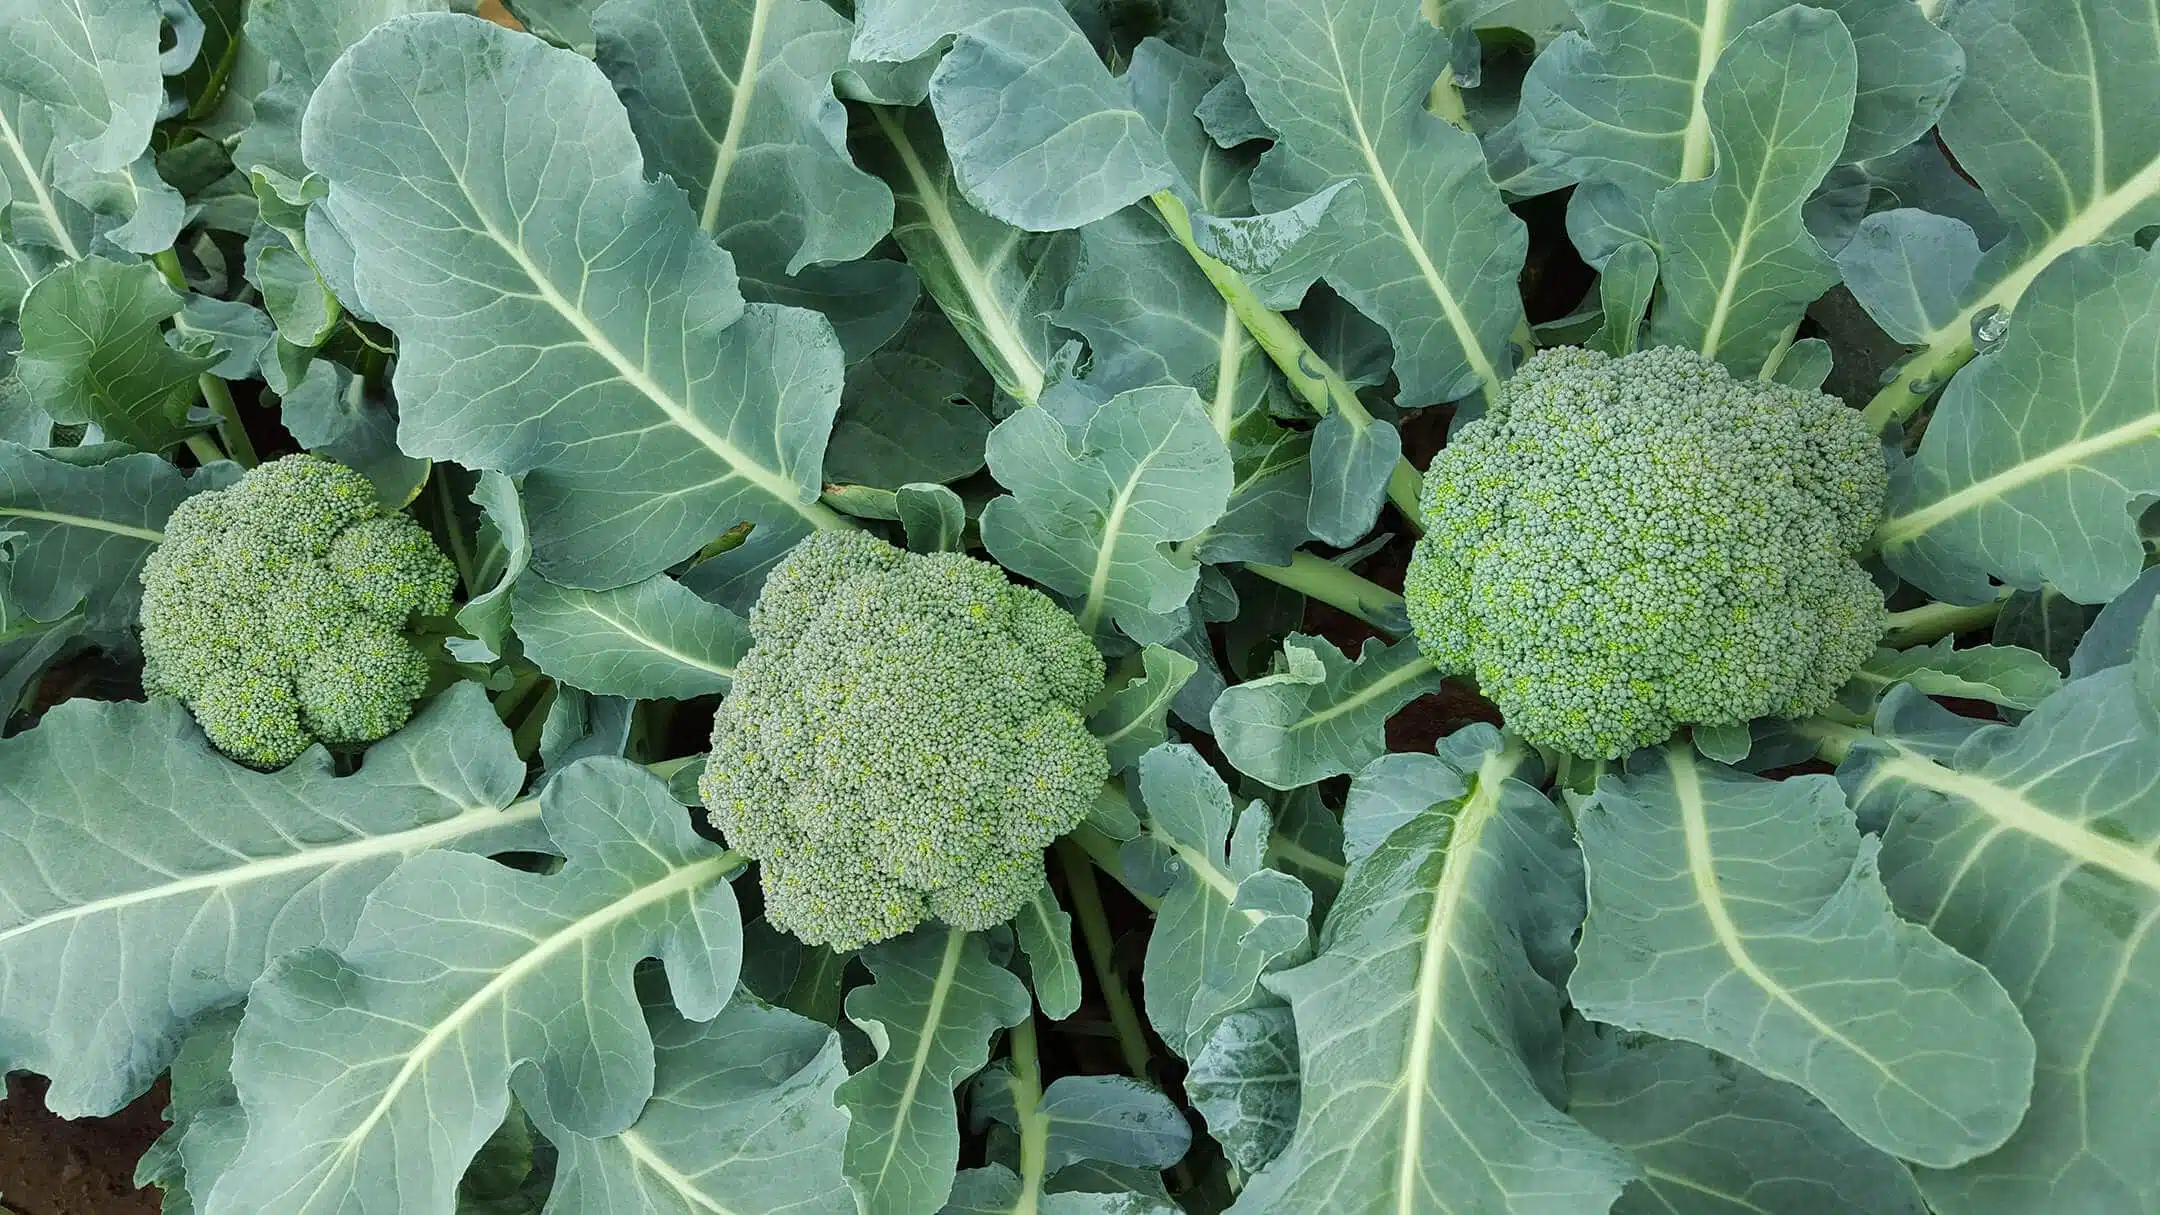 How To Get Seeds From Broccoli